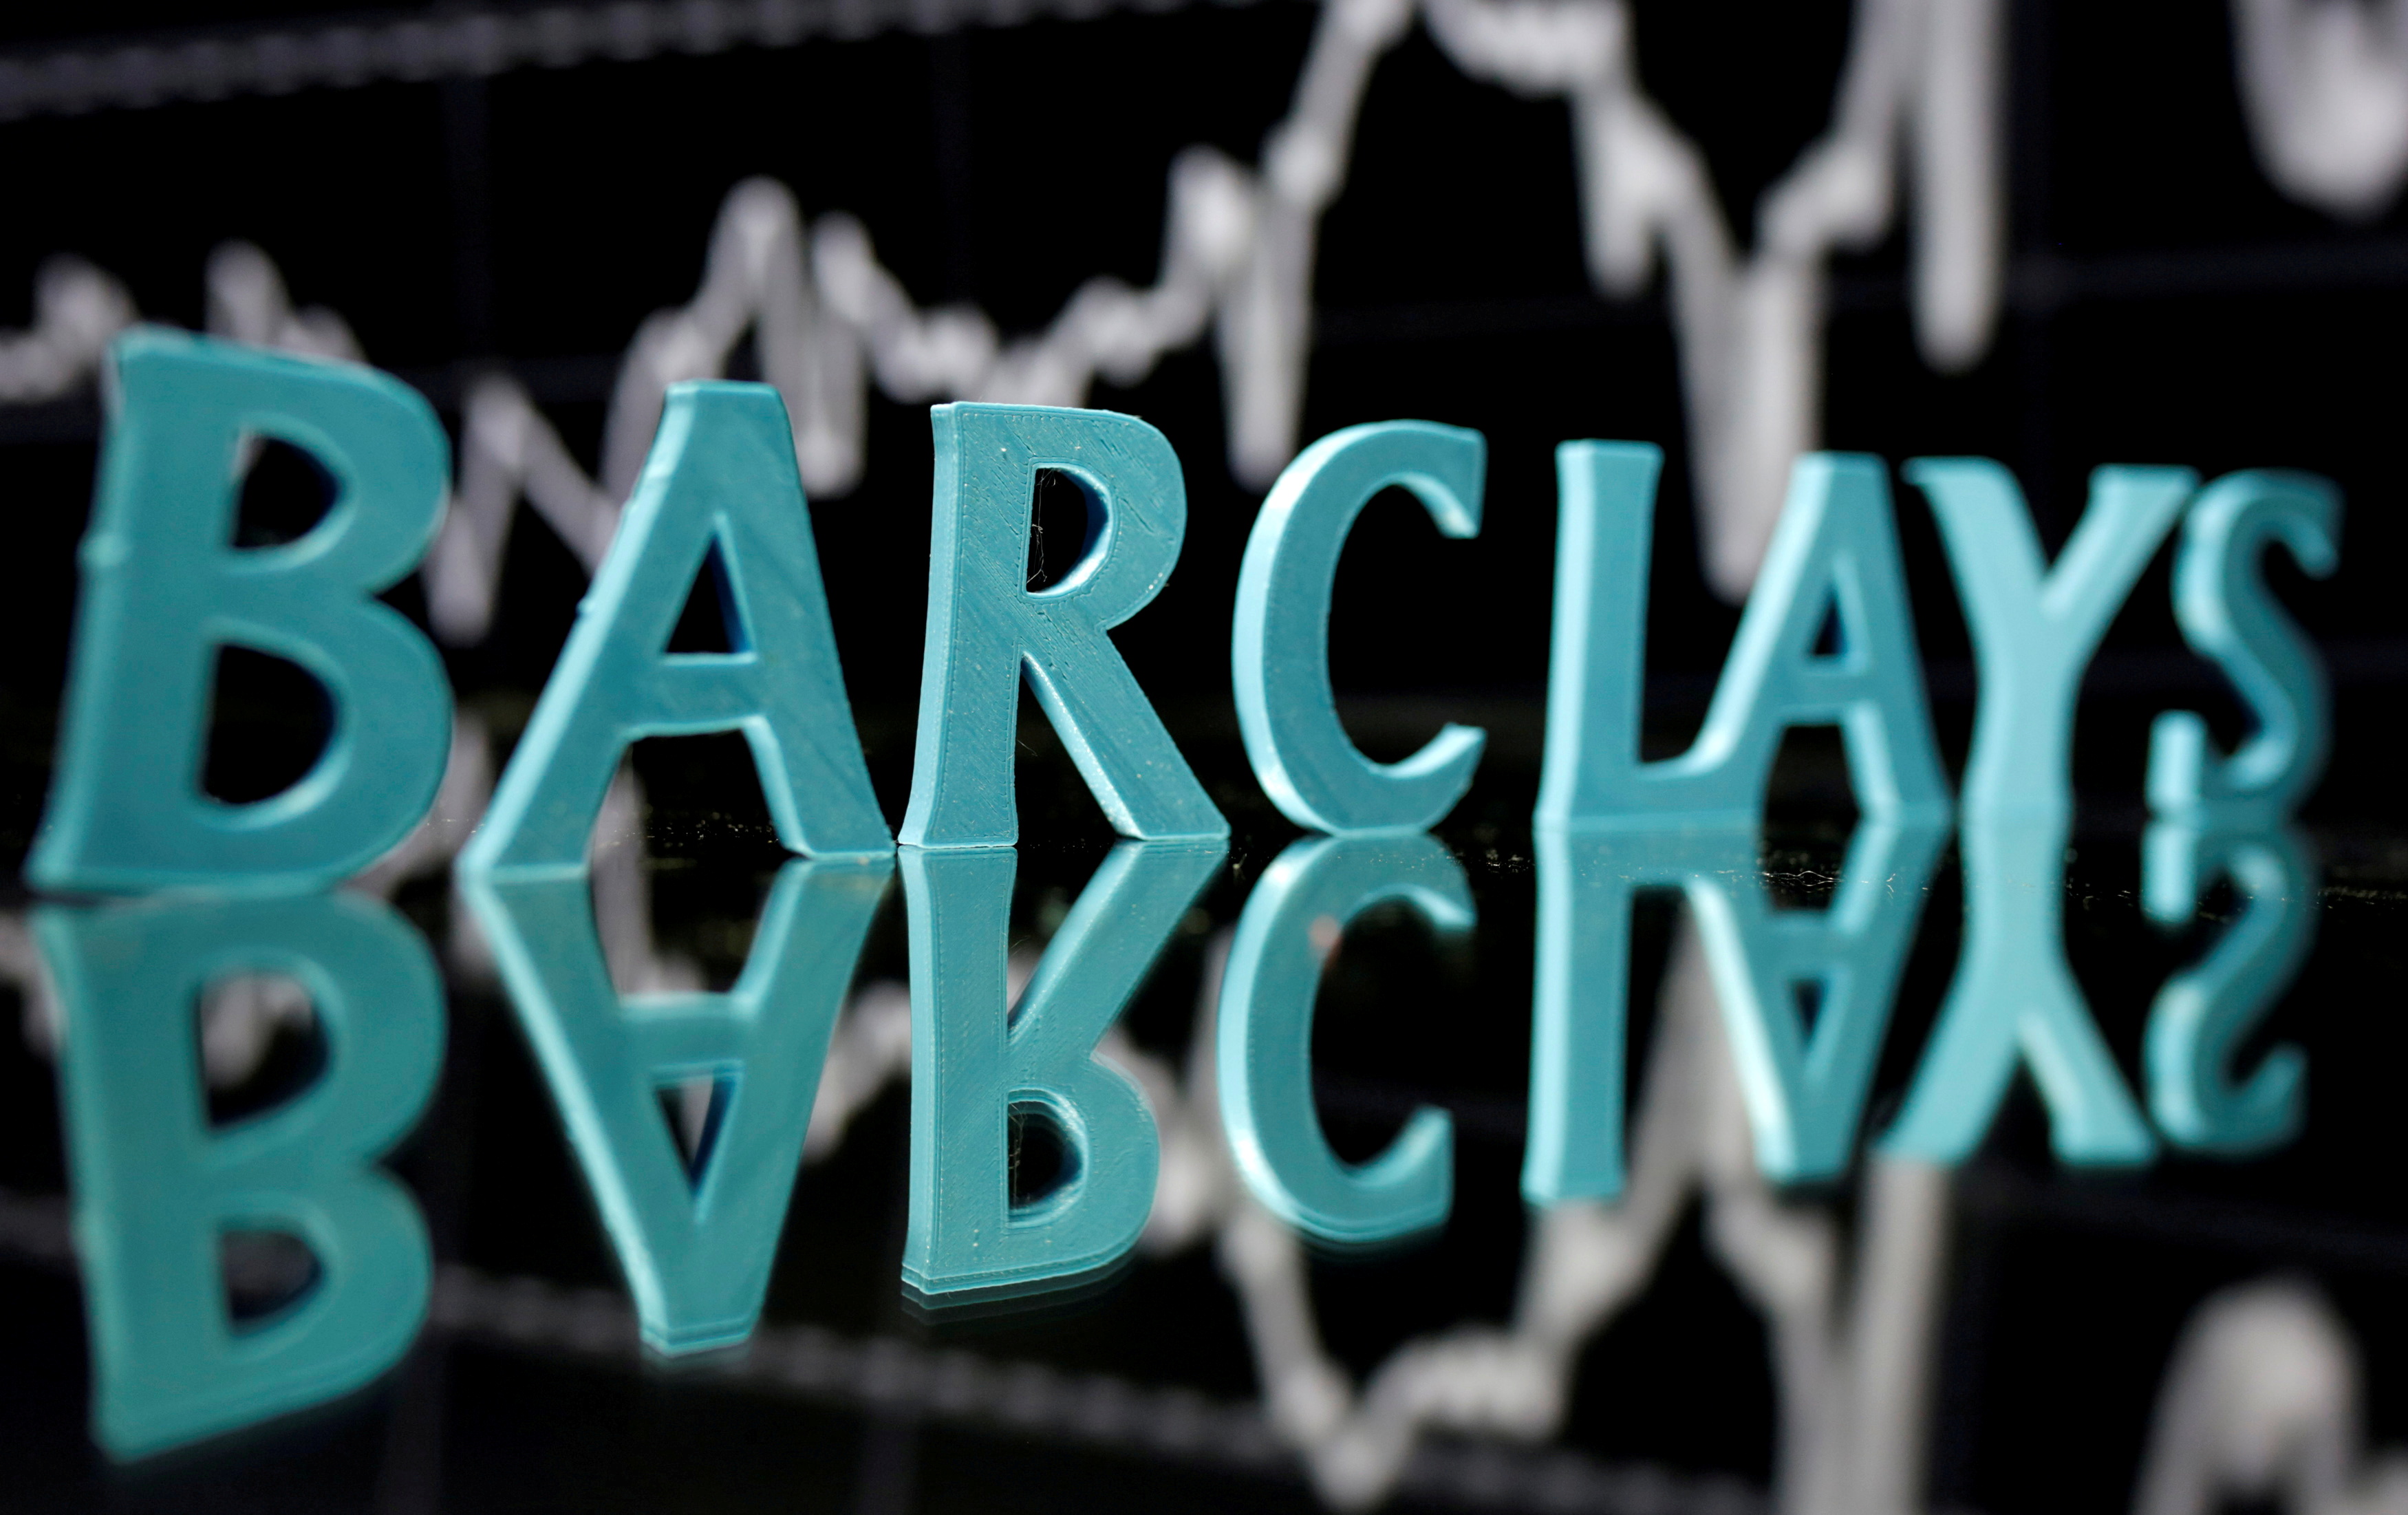 FILE PHOTO: The Barclays logo is seen in front of displayed stock graph in this illustration